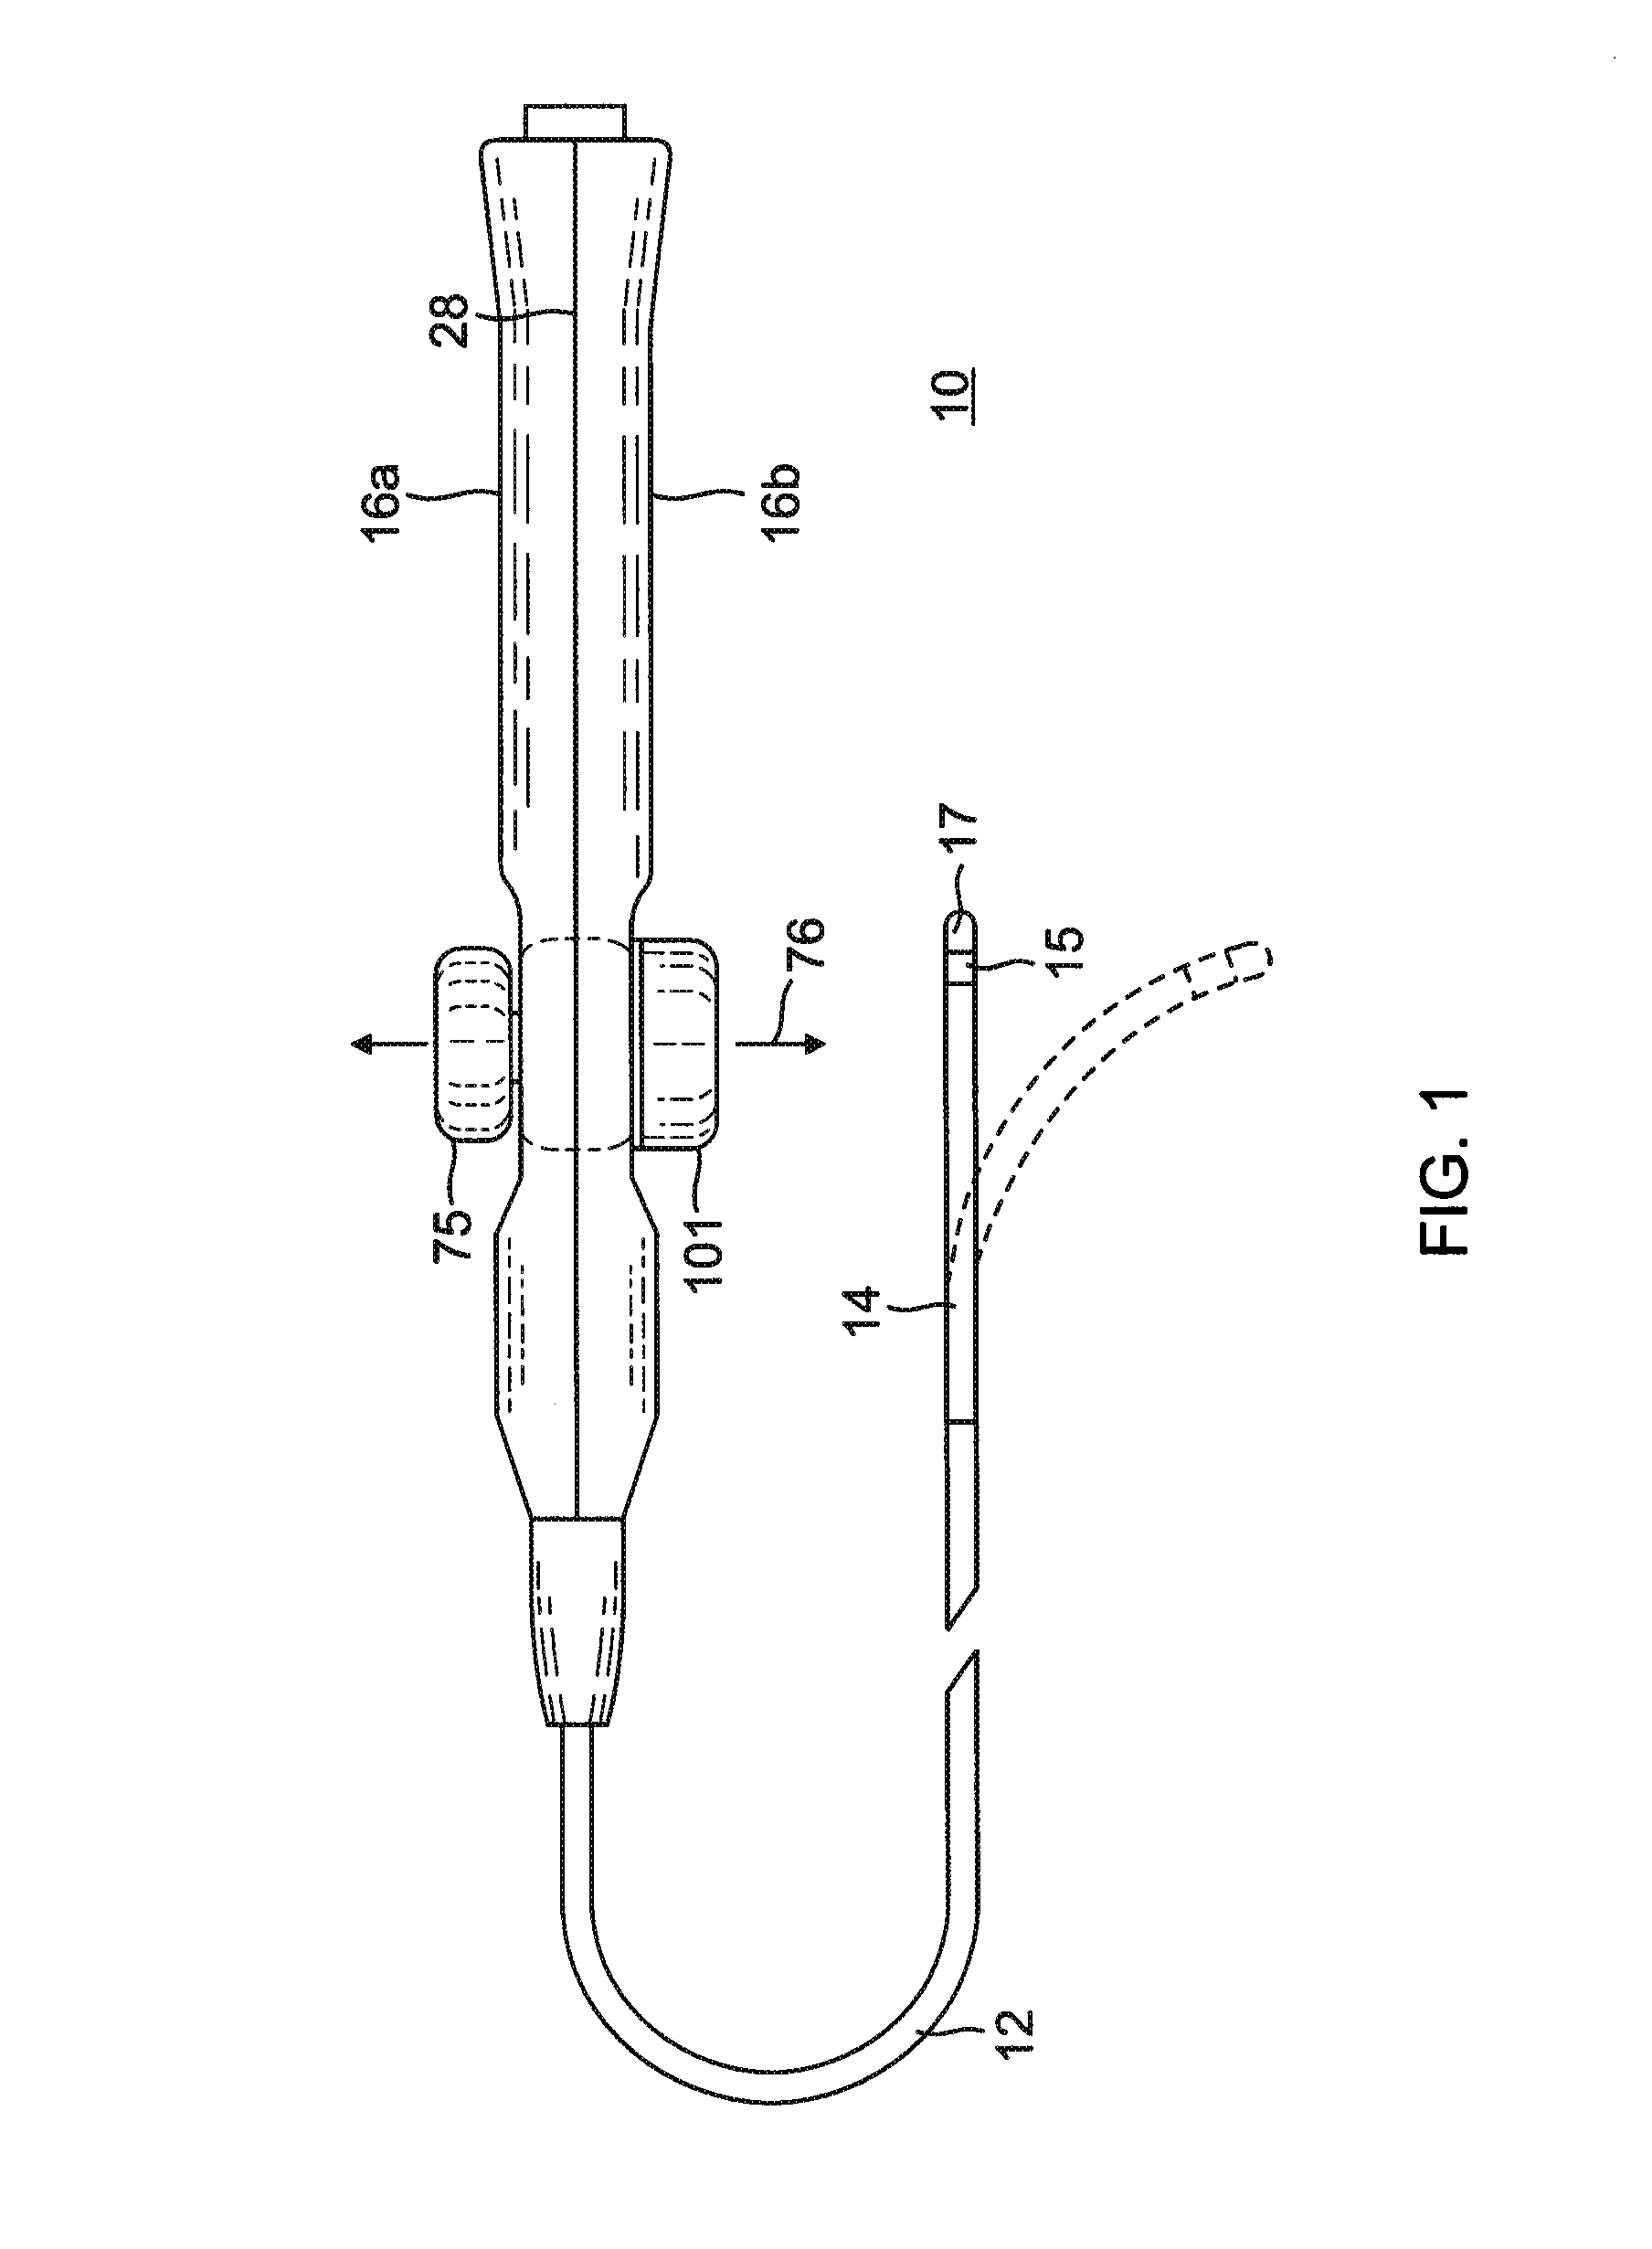 Catheter with single axial sensors